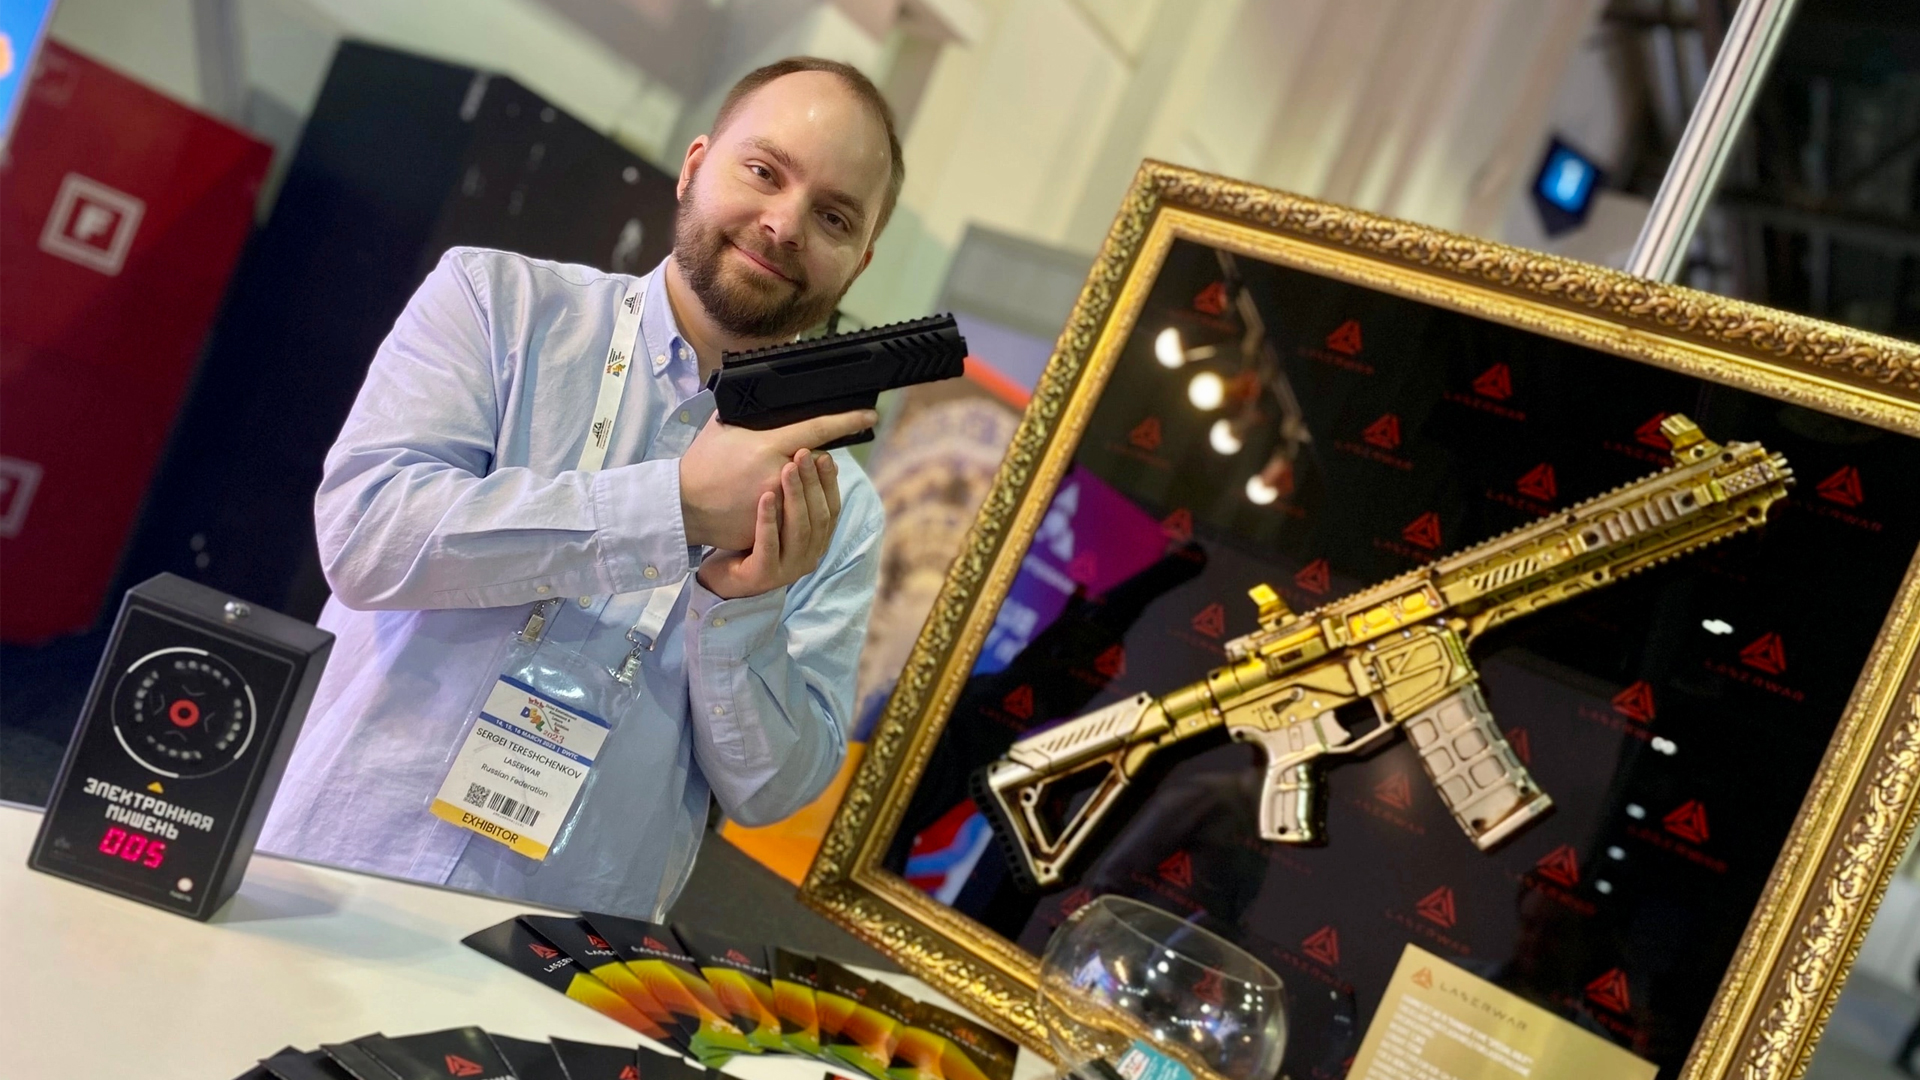 A rifle for a sheikh sparked furore at the exhibition in Dubai  